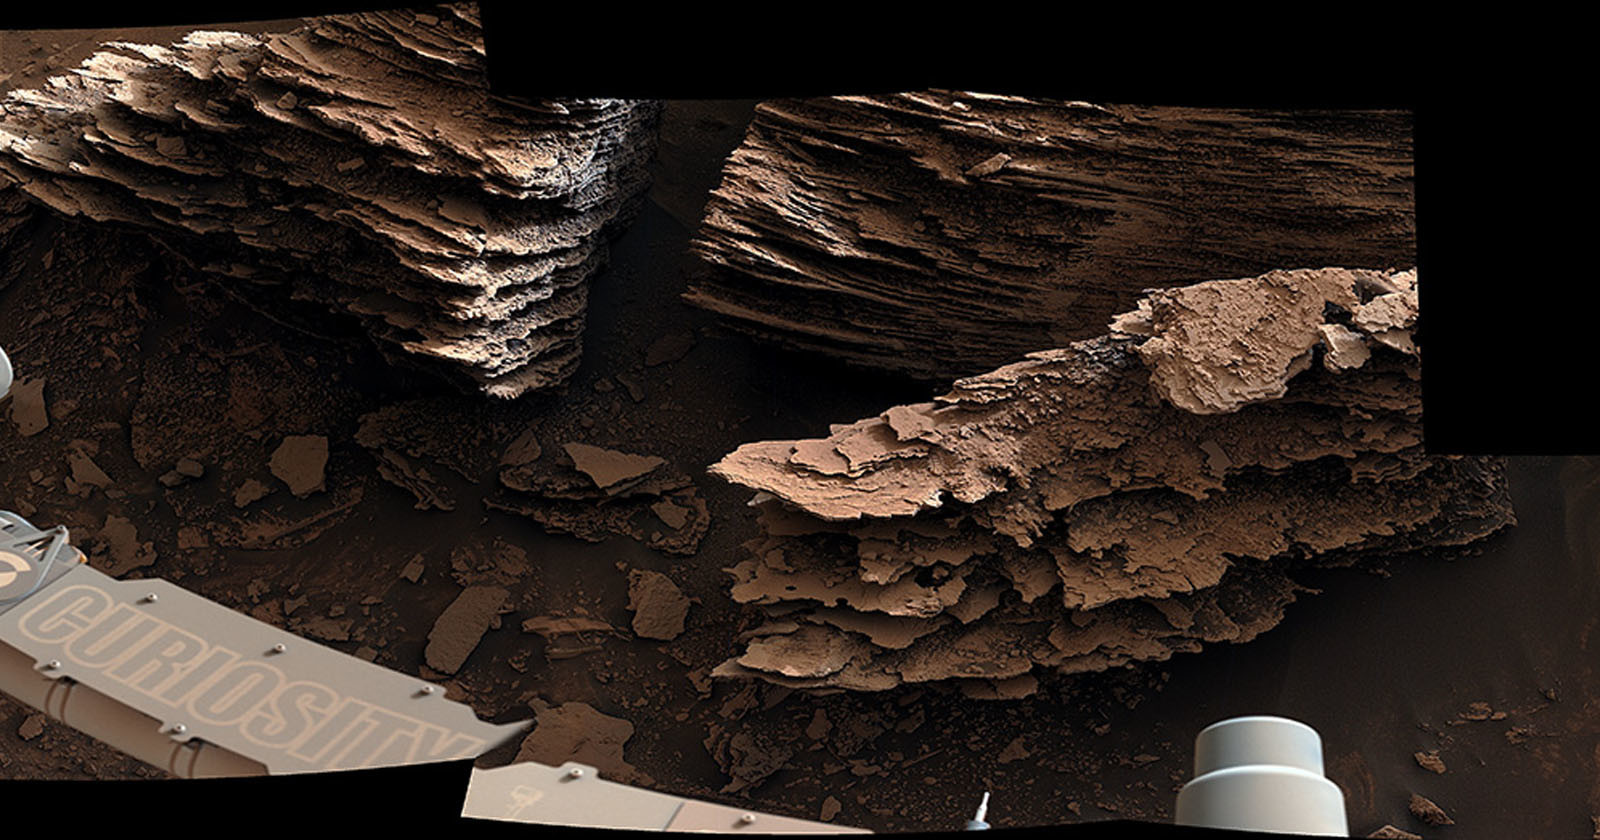 Curiosity Rover Captures Flaky Rocks on Mars from Past Climate Change